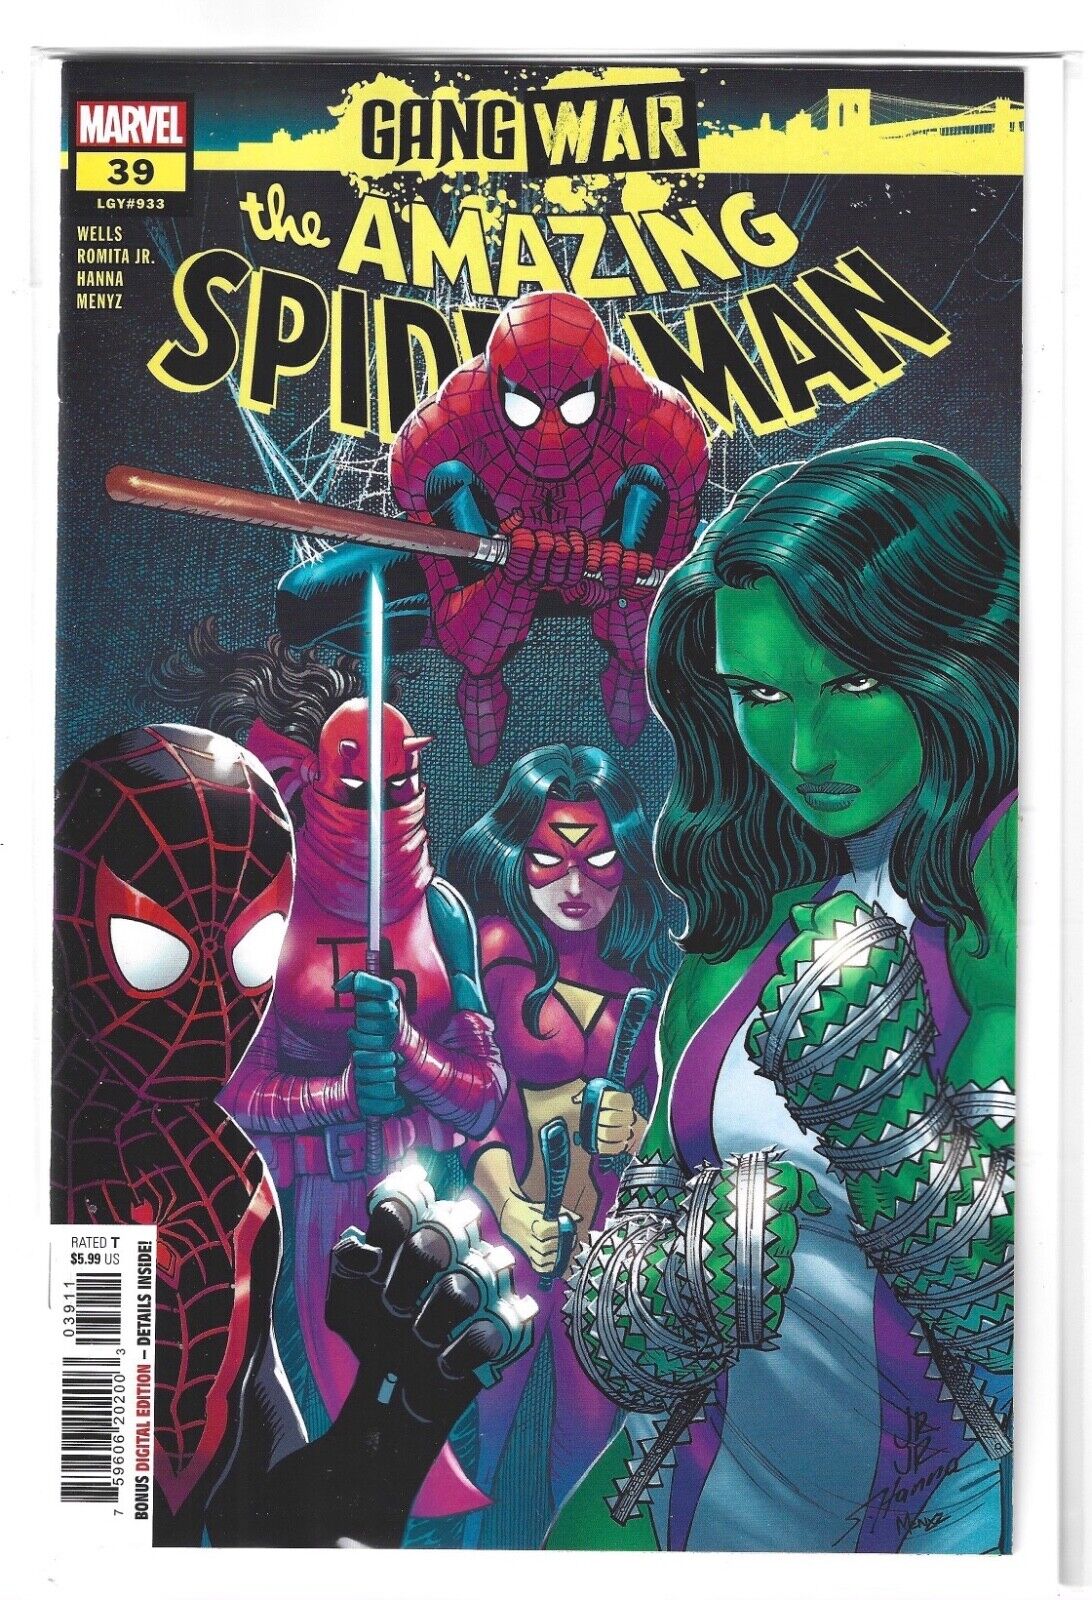 Amazing Spider-Man #39 (2023)  GANG WAR KICKS OFF HERE  COVER CHOICE  MARVEL NM